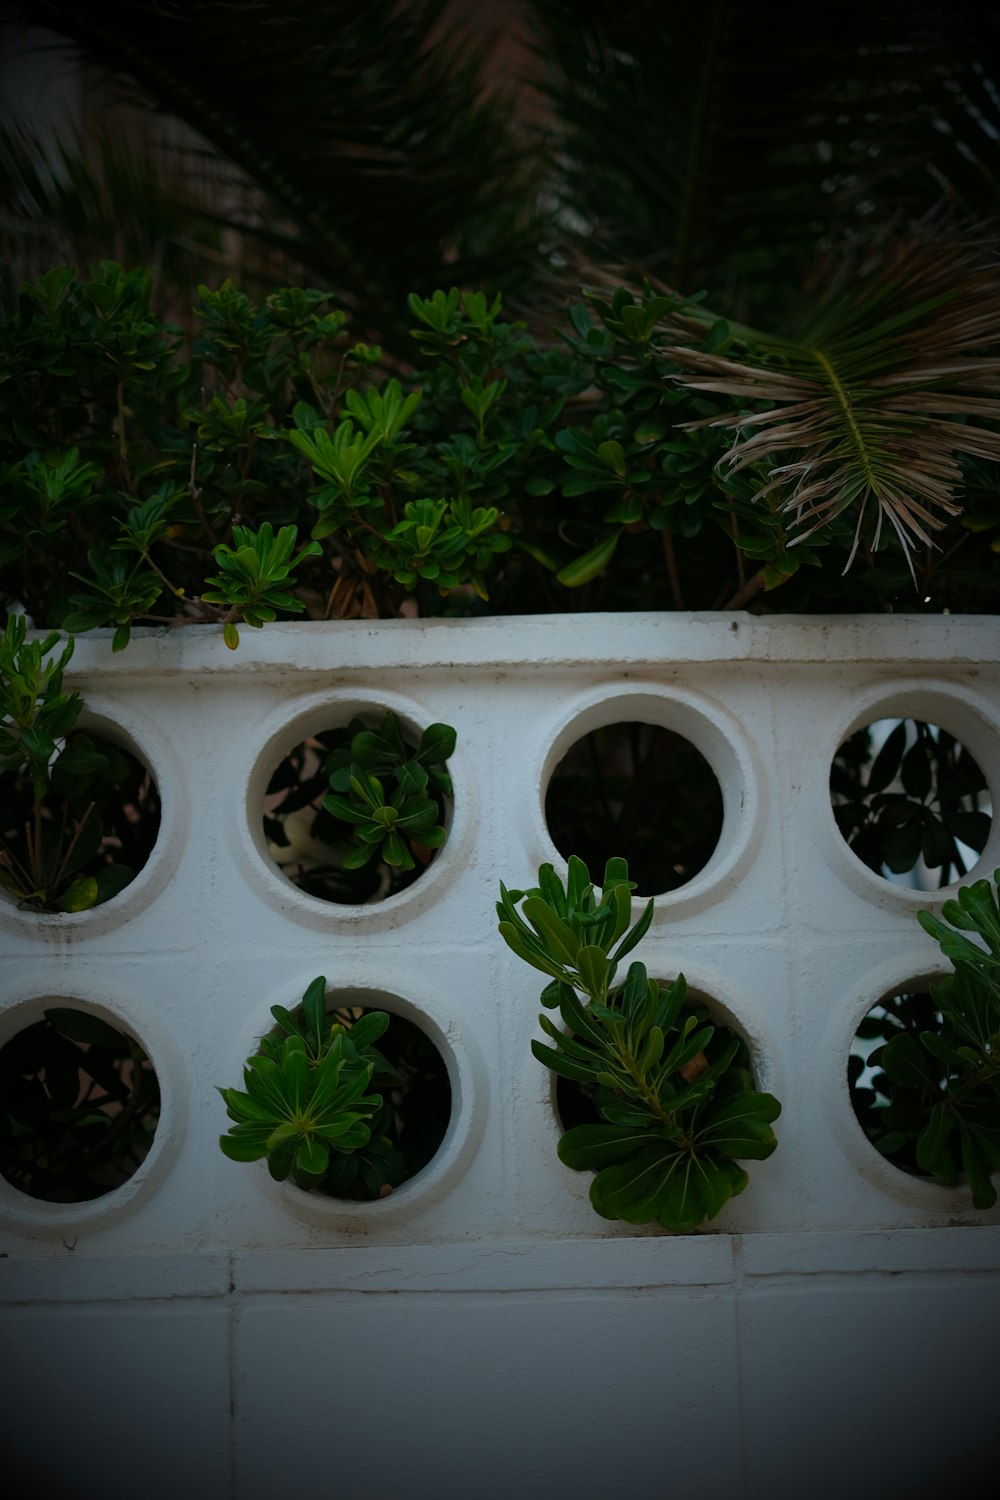 a close up of a planter with plants in it